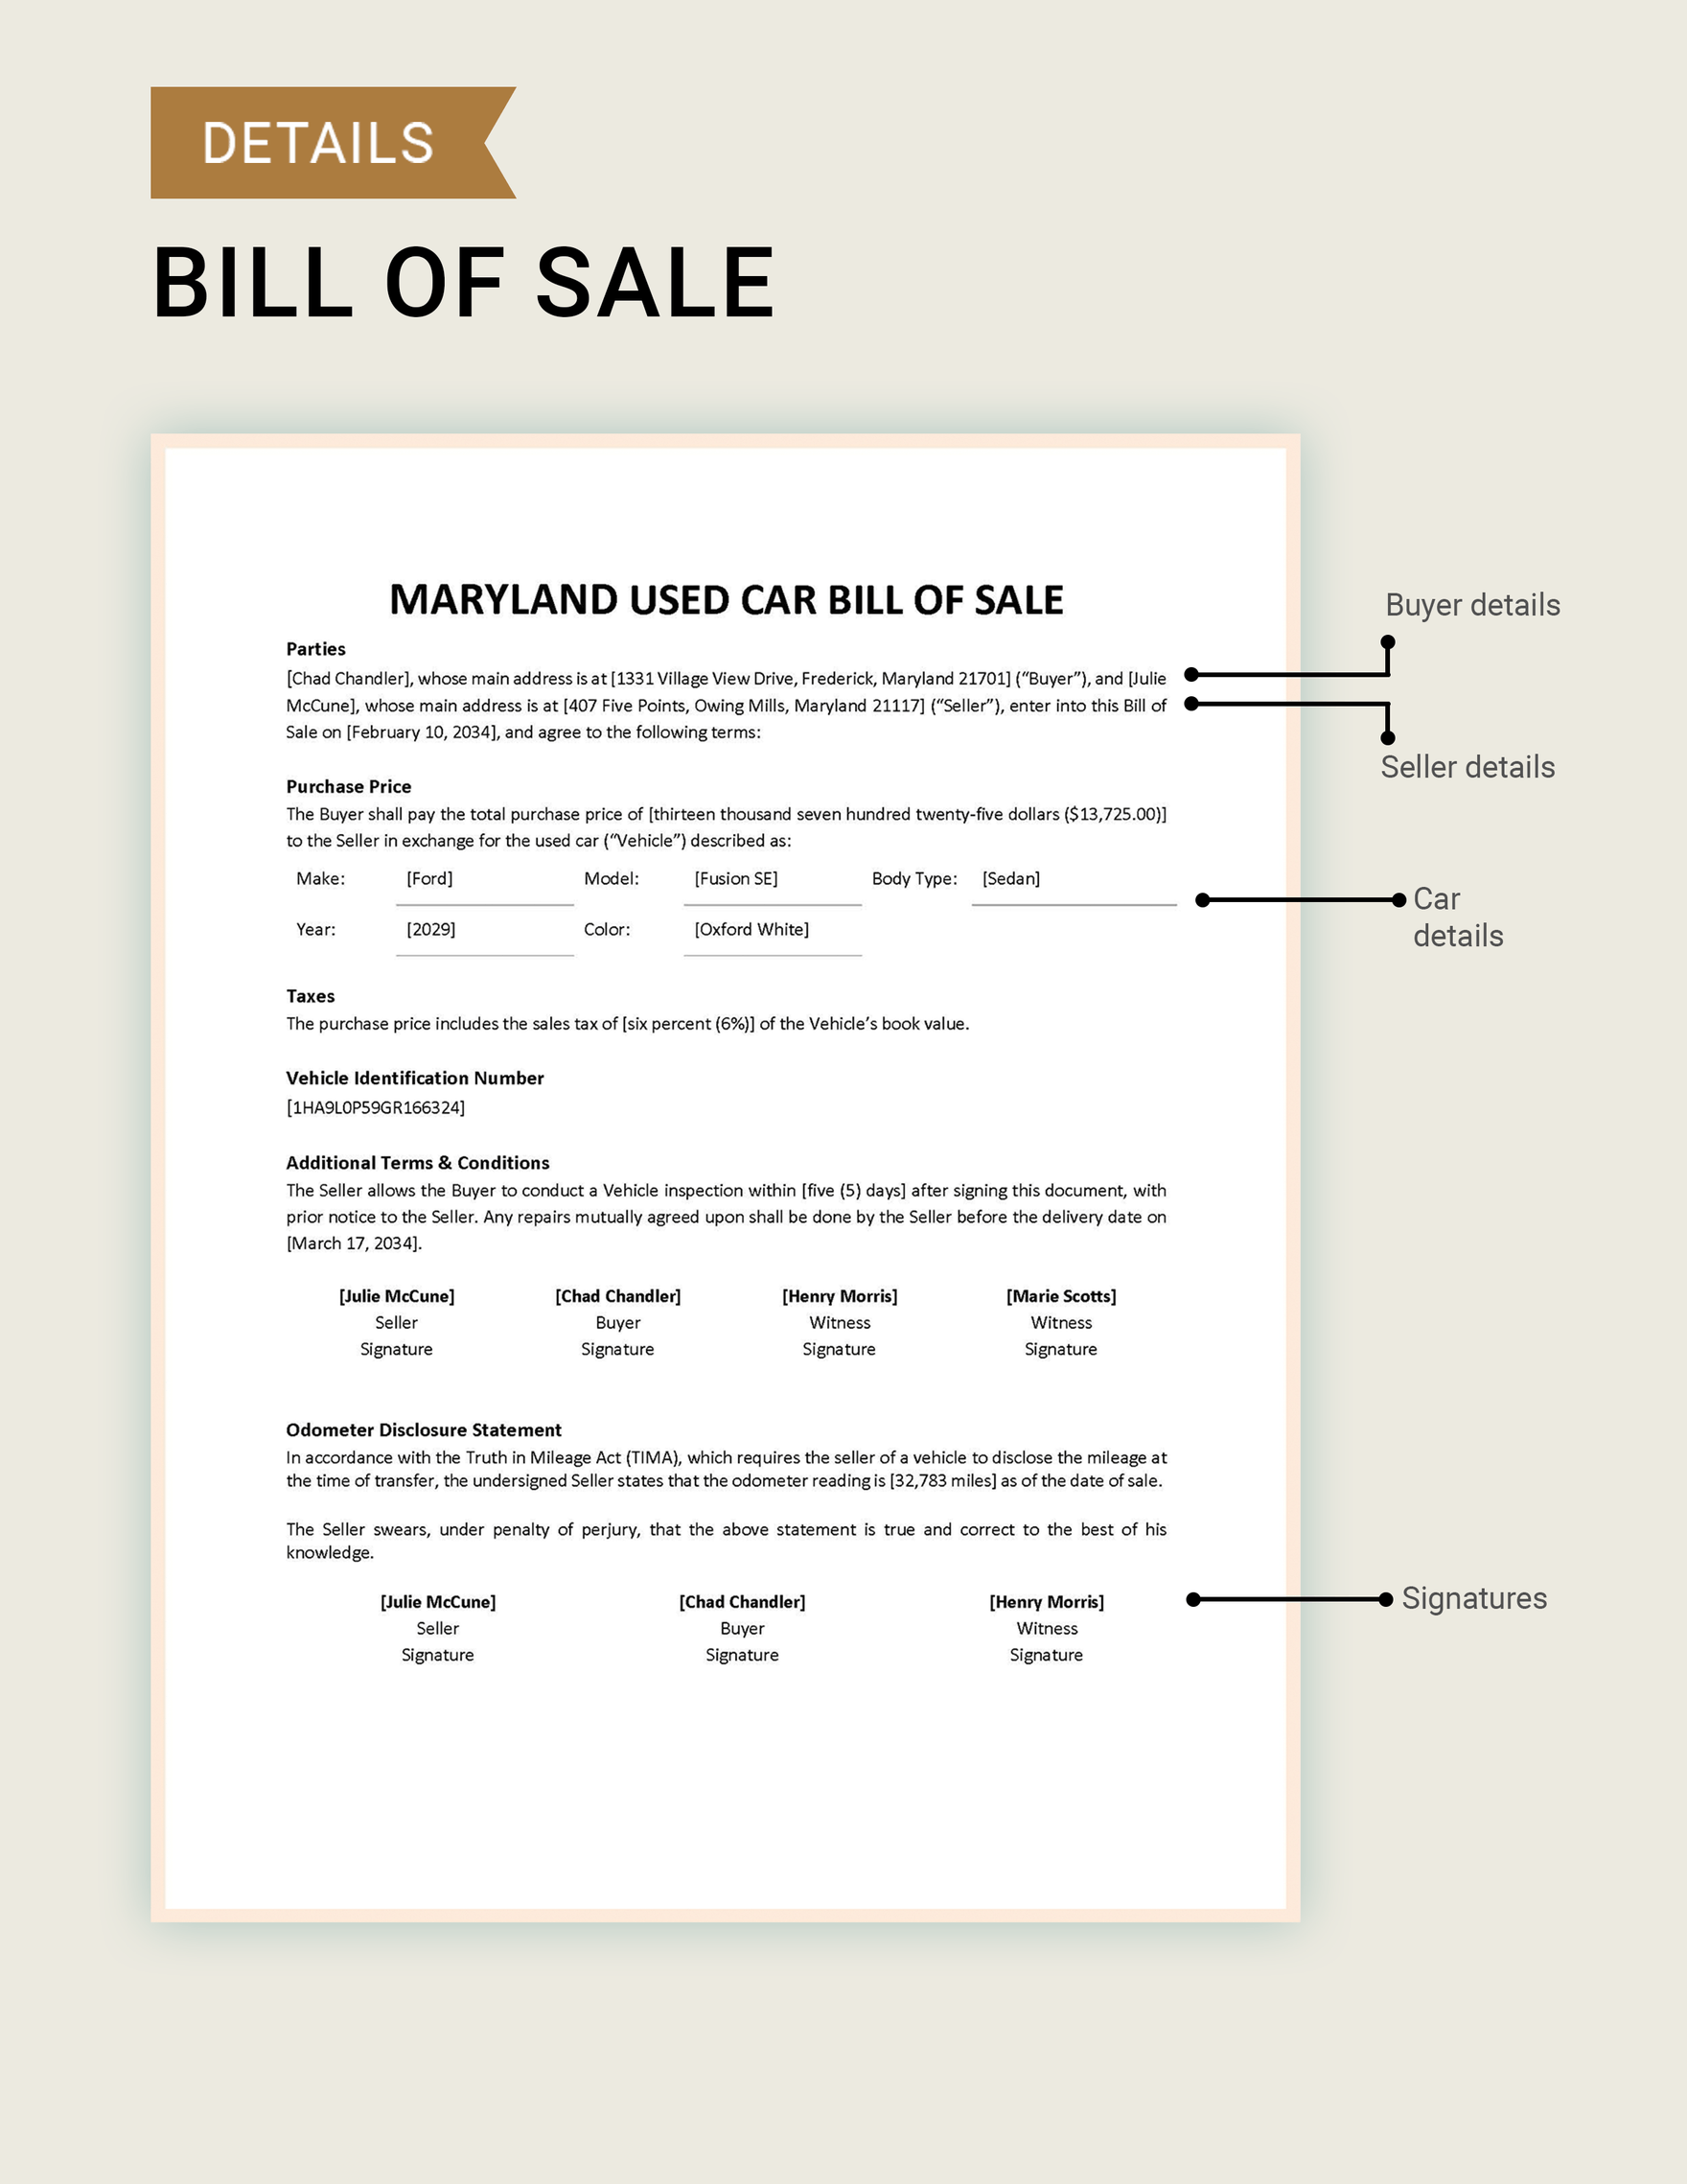 Maryland Used Car Bill of Sale Template in PDF Word Google Docs